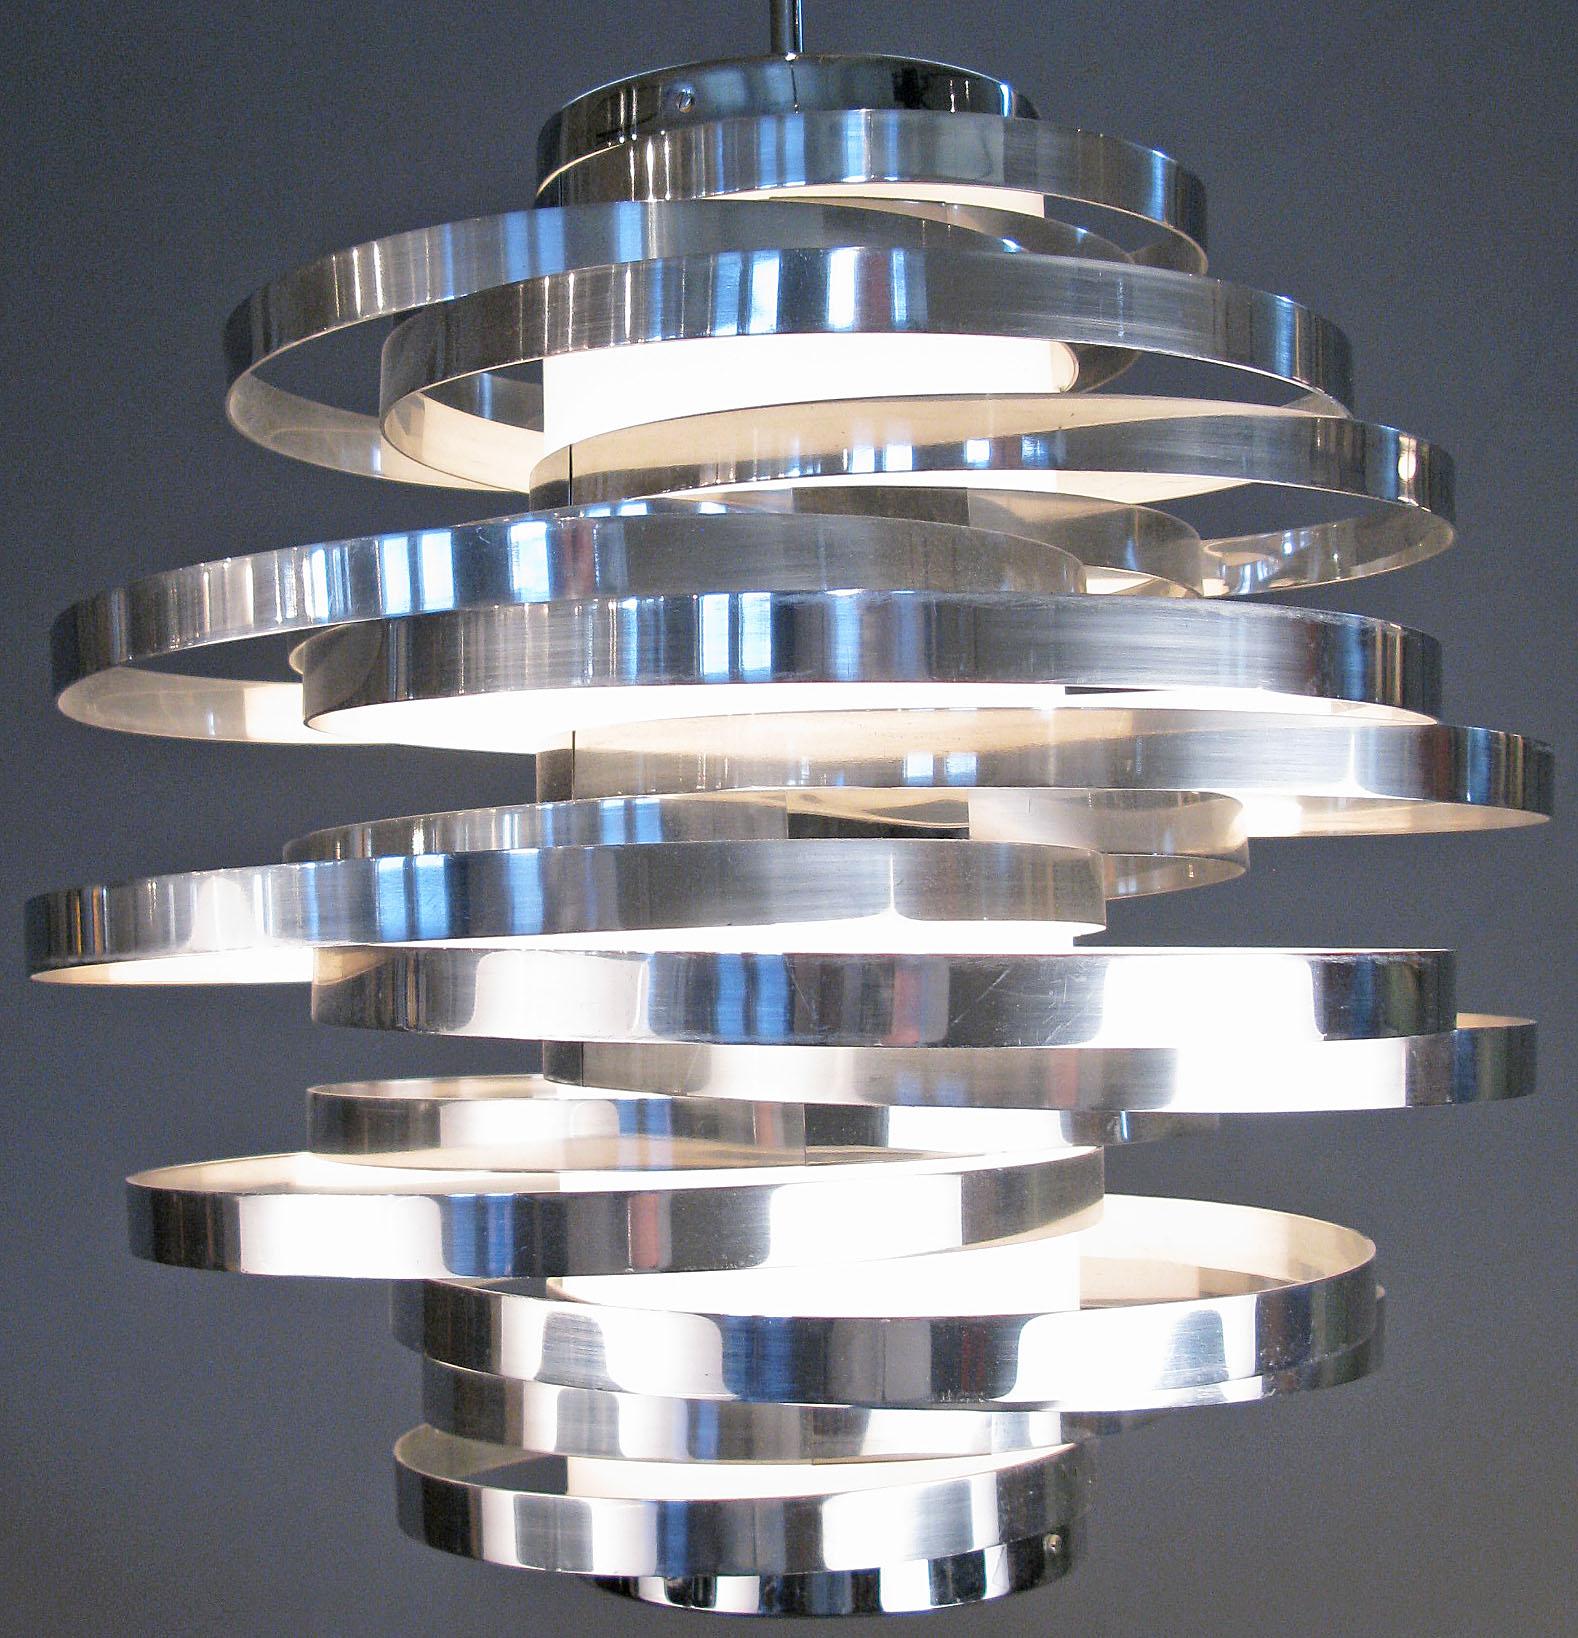 A stunning and dynamic vintage 1970's Italian hanging light designed by Max Sauze for Sciolari. one of his best designs, composed of a series of graduated bands of chromed steel, all attached to a central column of light, with the bands placed so